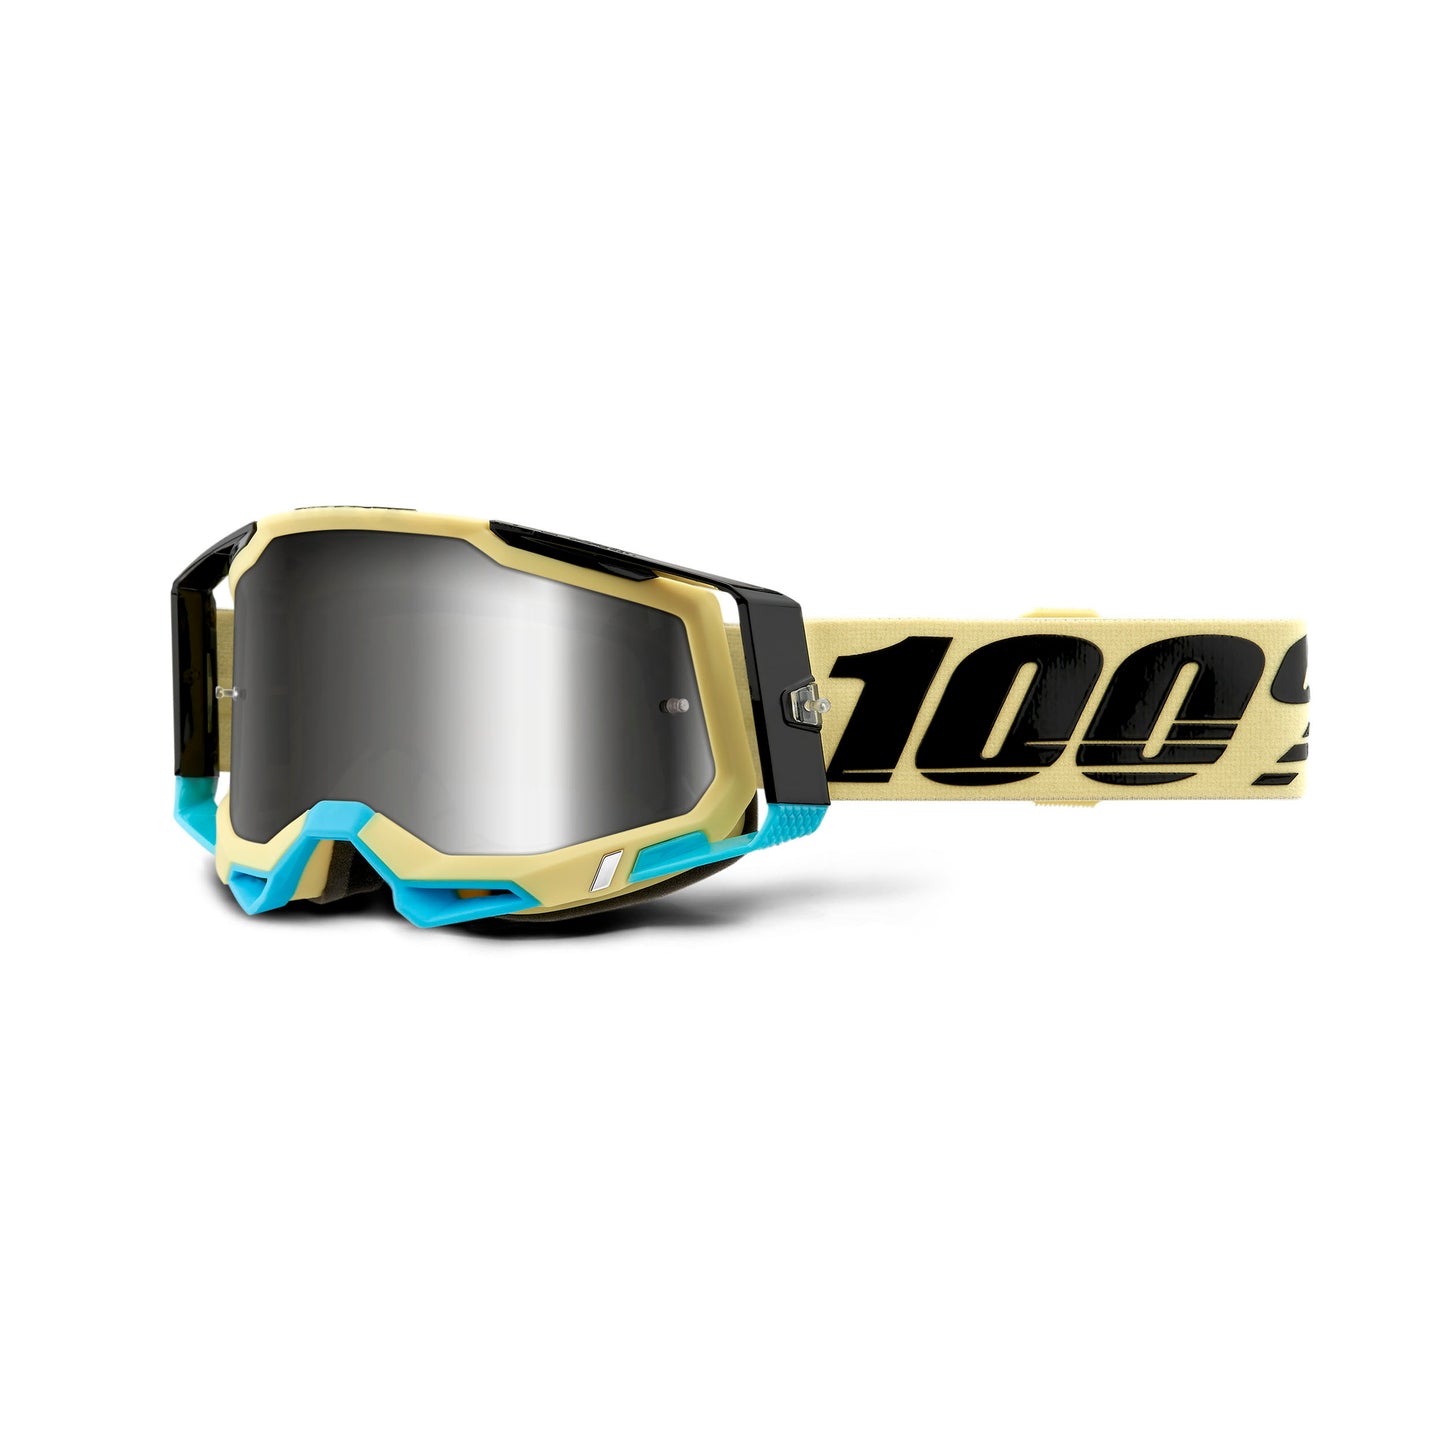 100 Percent Racecraft 2 Goggles - One Size Fits Most - Airblast - Silver Mirror Lens